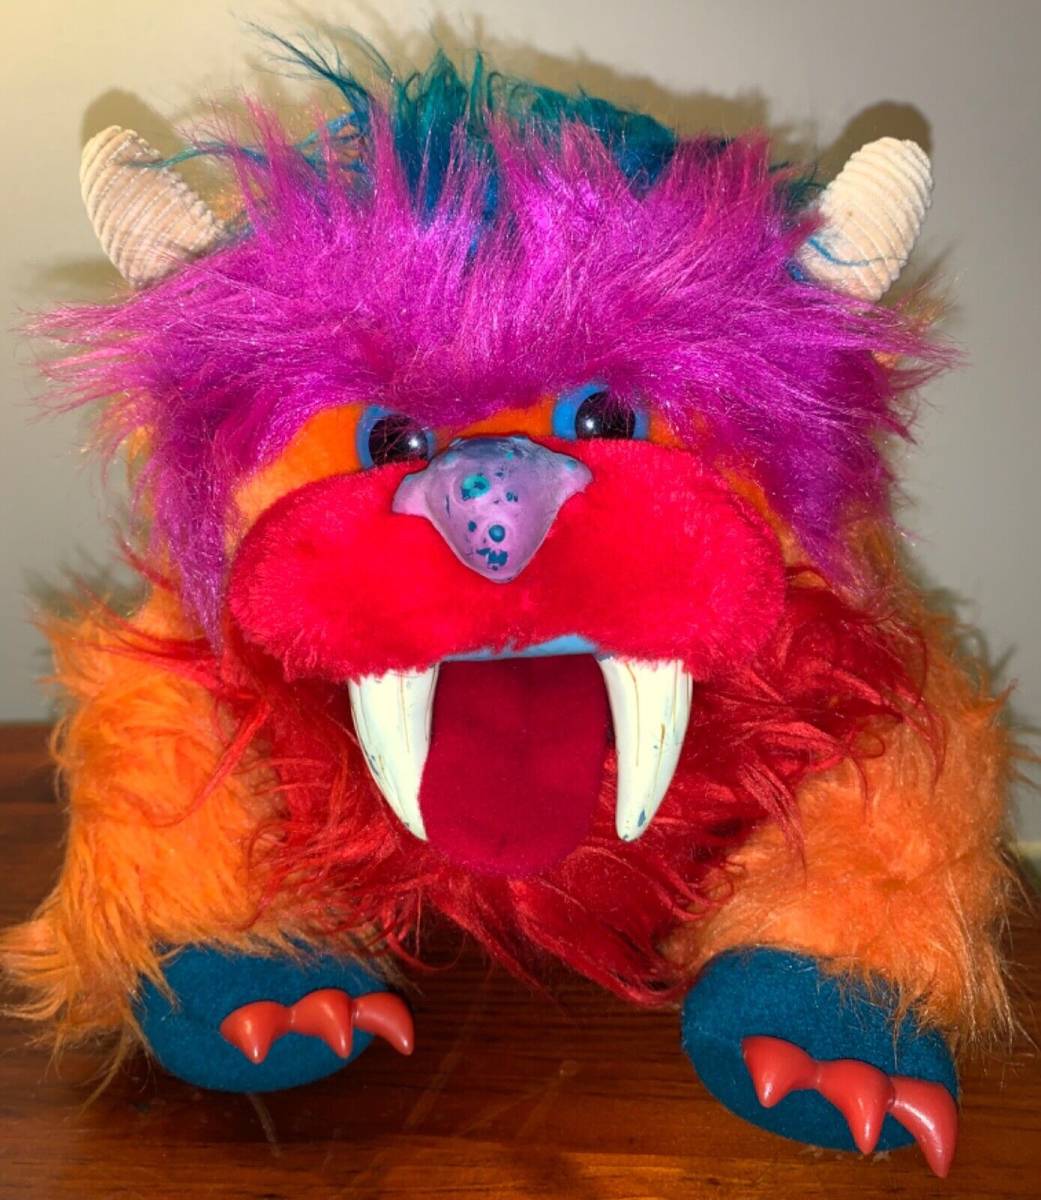 ‘86 Vintage My Pet Monster GWONK Plush Toy Hand Puppet by Amtoy Great condition 海外 即決